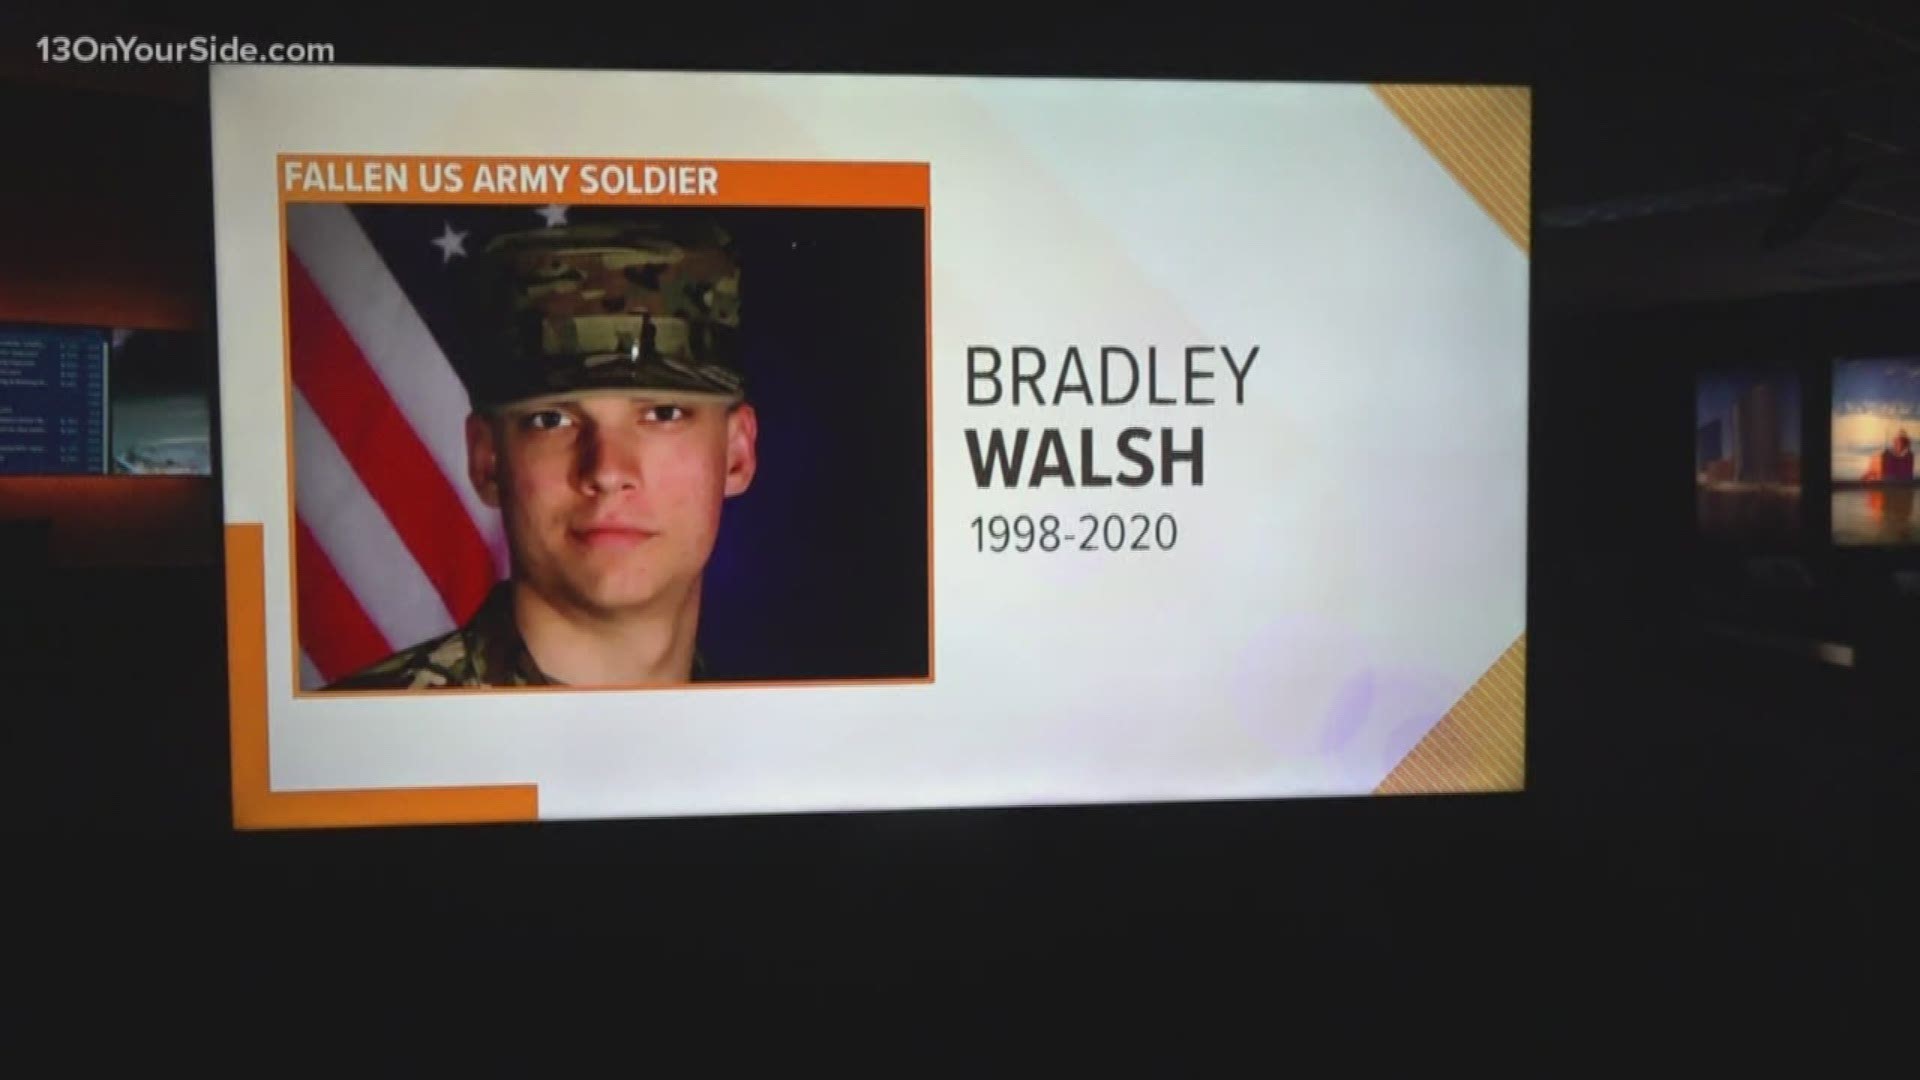 Whitmer has ordered U.S. and Michigan flags lowered to half-staff in the state on Thursday, Jan. 23 to honor the service of Army Spc. Bradley Walsh.